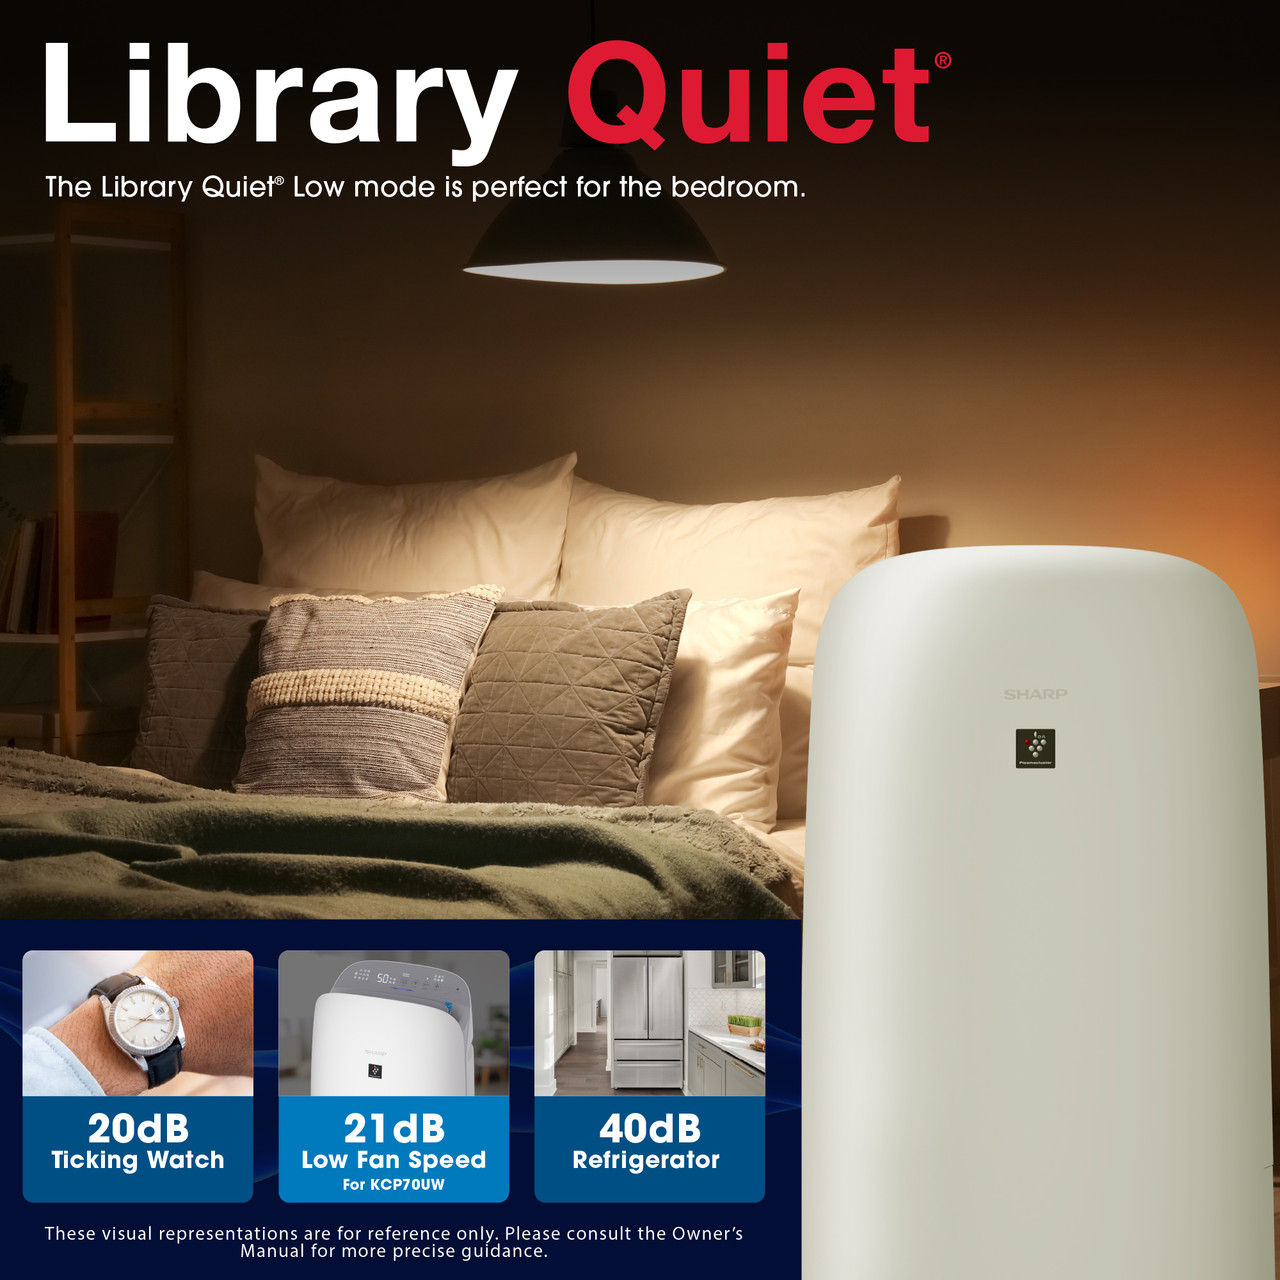 Library Quiet
The Library Quiet® Low mode is perfect for the bedroom.
20dB Ticking Watch
21 dB Low Fan Speed for KCP70UW
40dB Refrigerator
These visual representations are for reference only. Please consult the Owner's Manual for more precise guidance.
KCP70UW